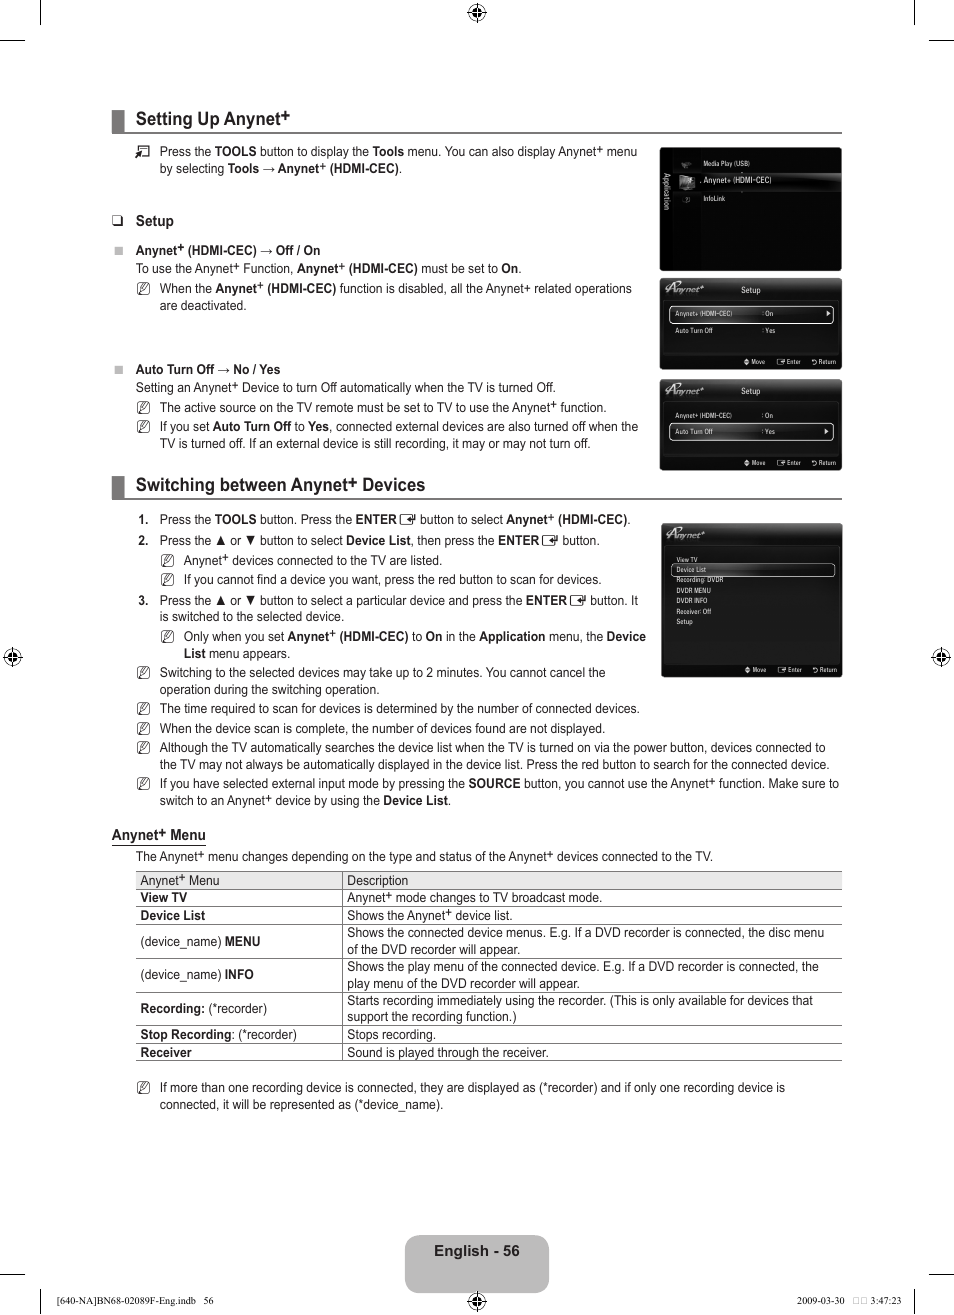 Setting up anynet, Switching between anynet+ devices | Samsung  LN40B640R3FUZA User Manual | Page 58 / 173